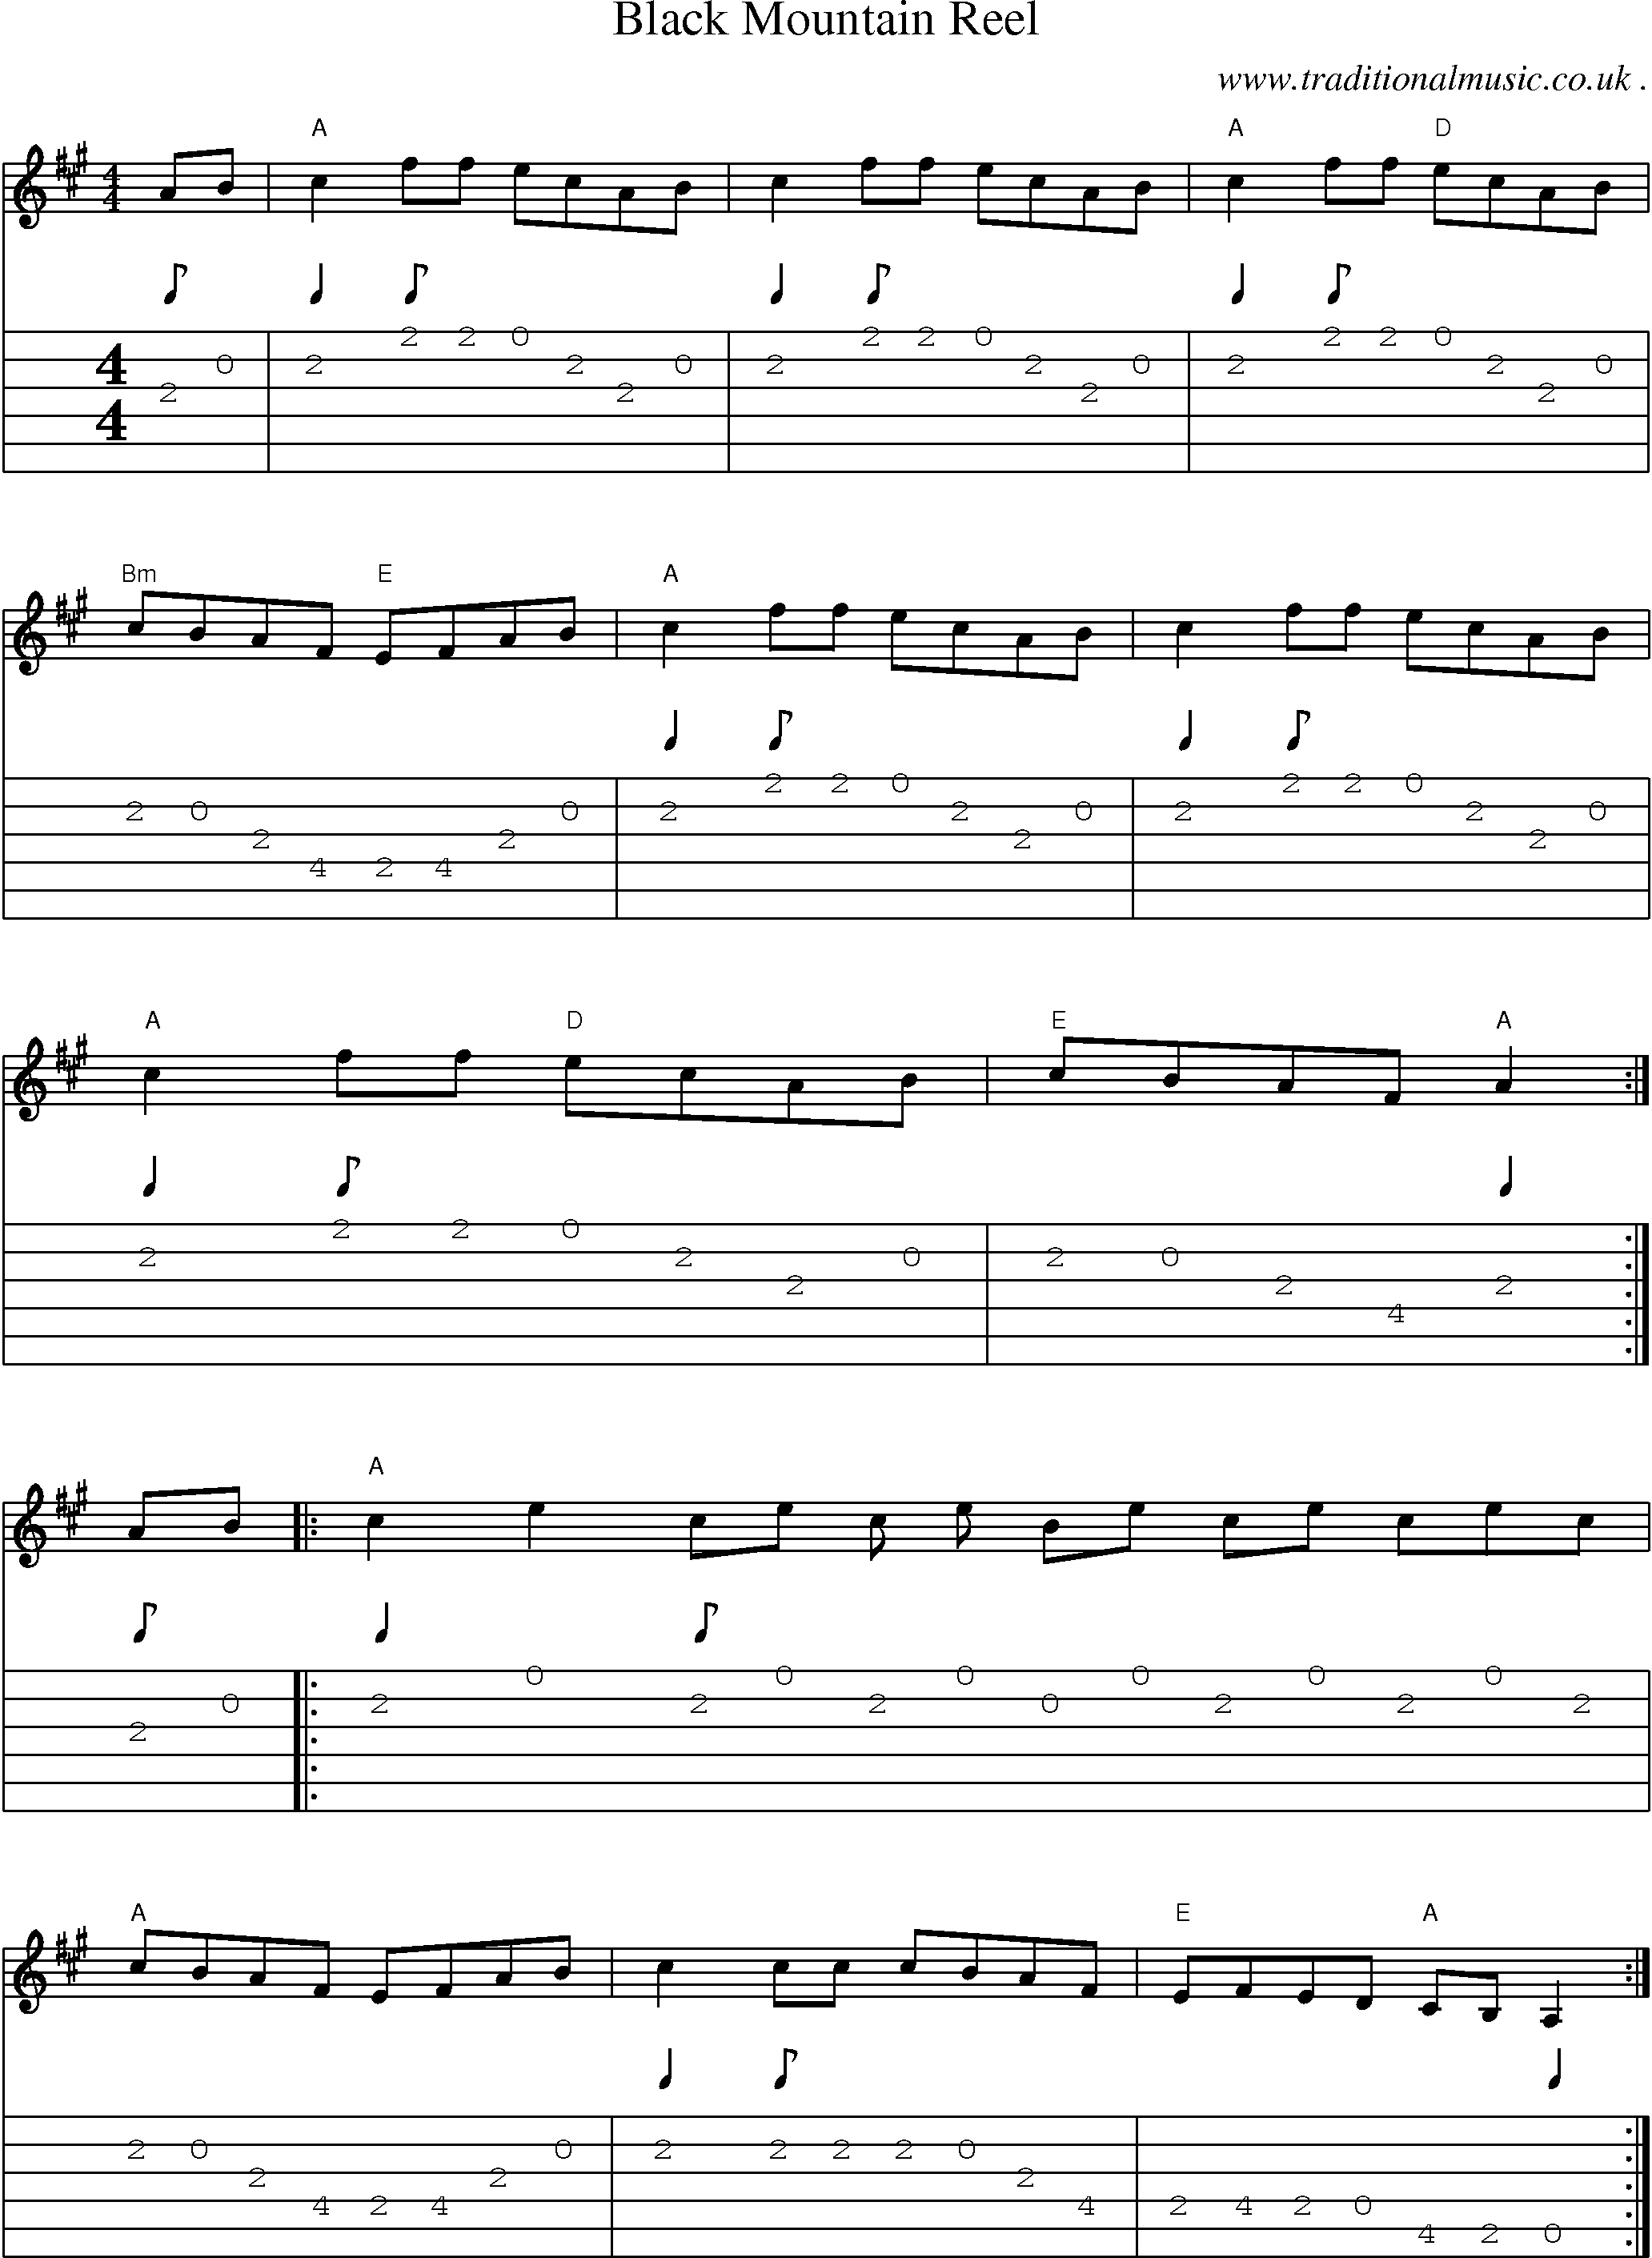 Music Score and Guitar Tabs for Black Mountain Reel